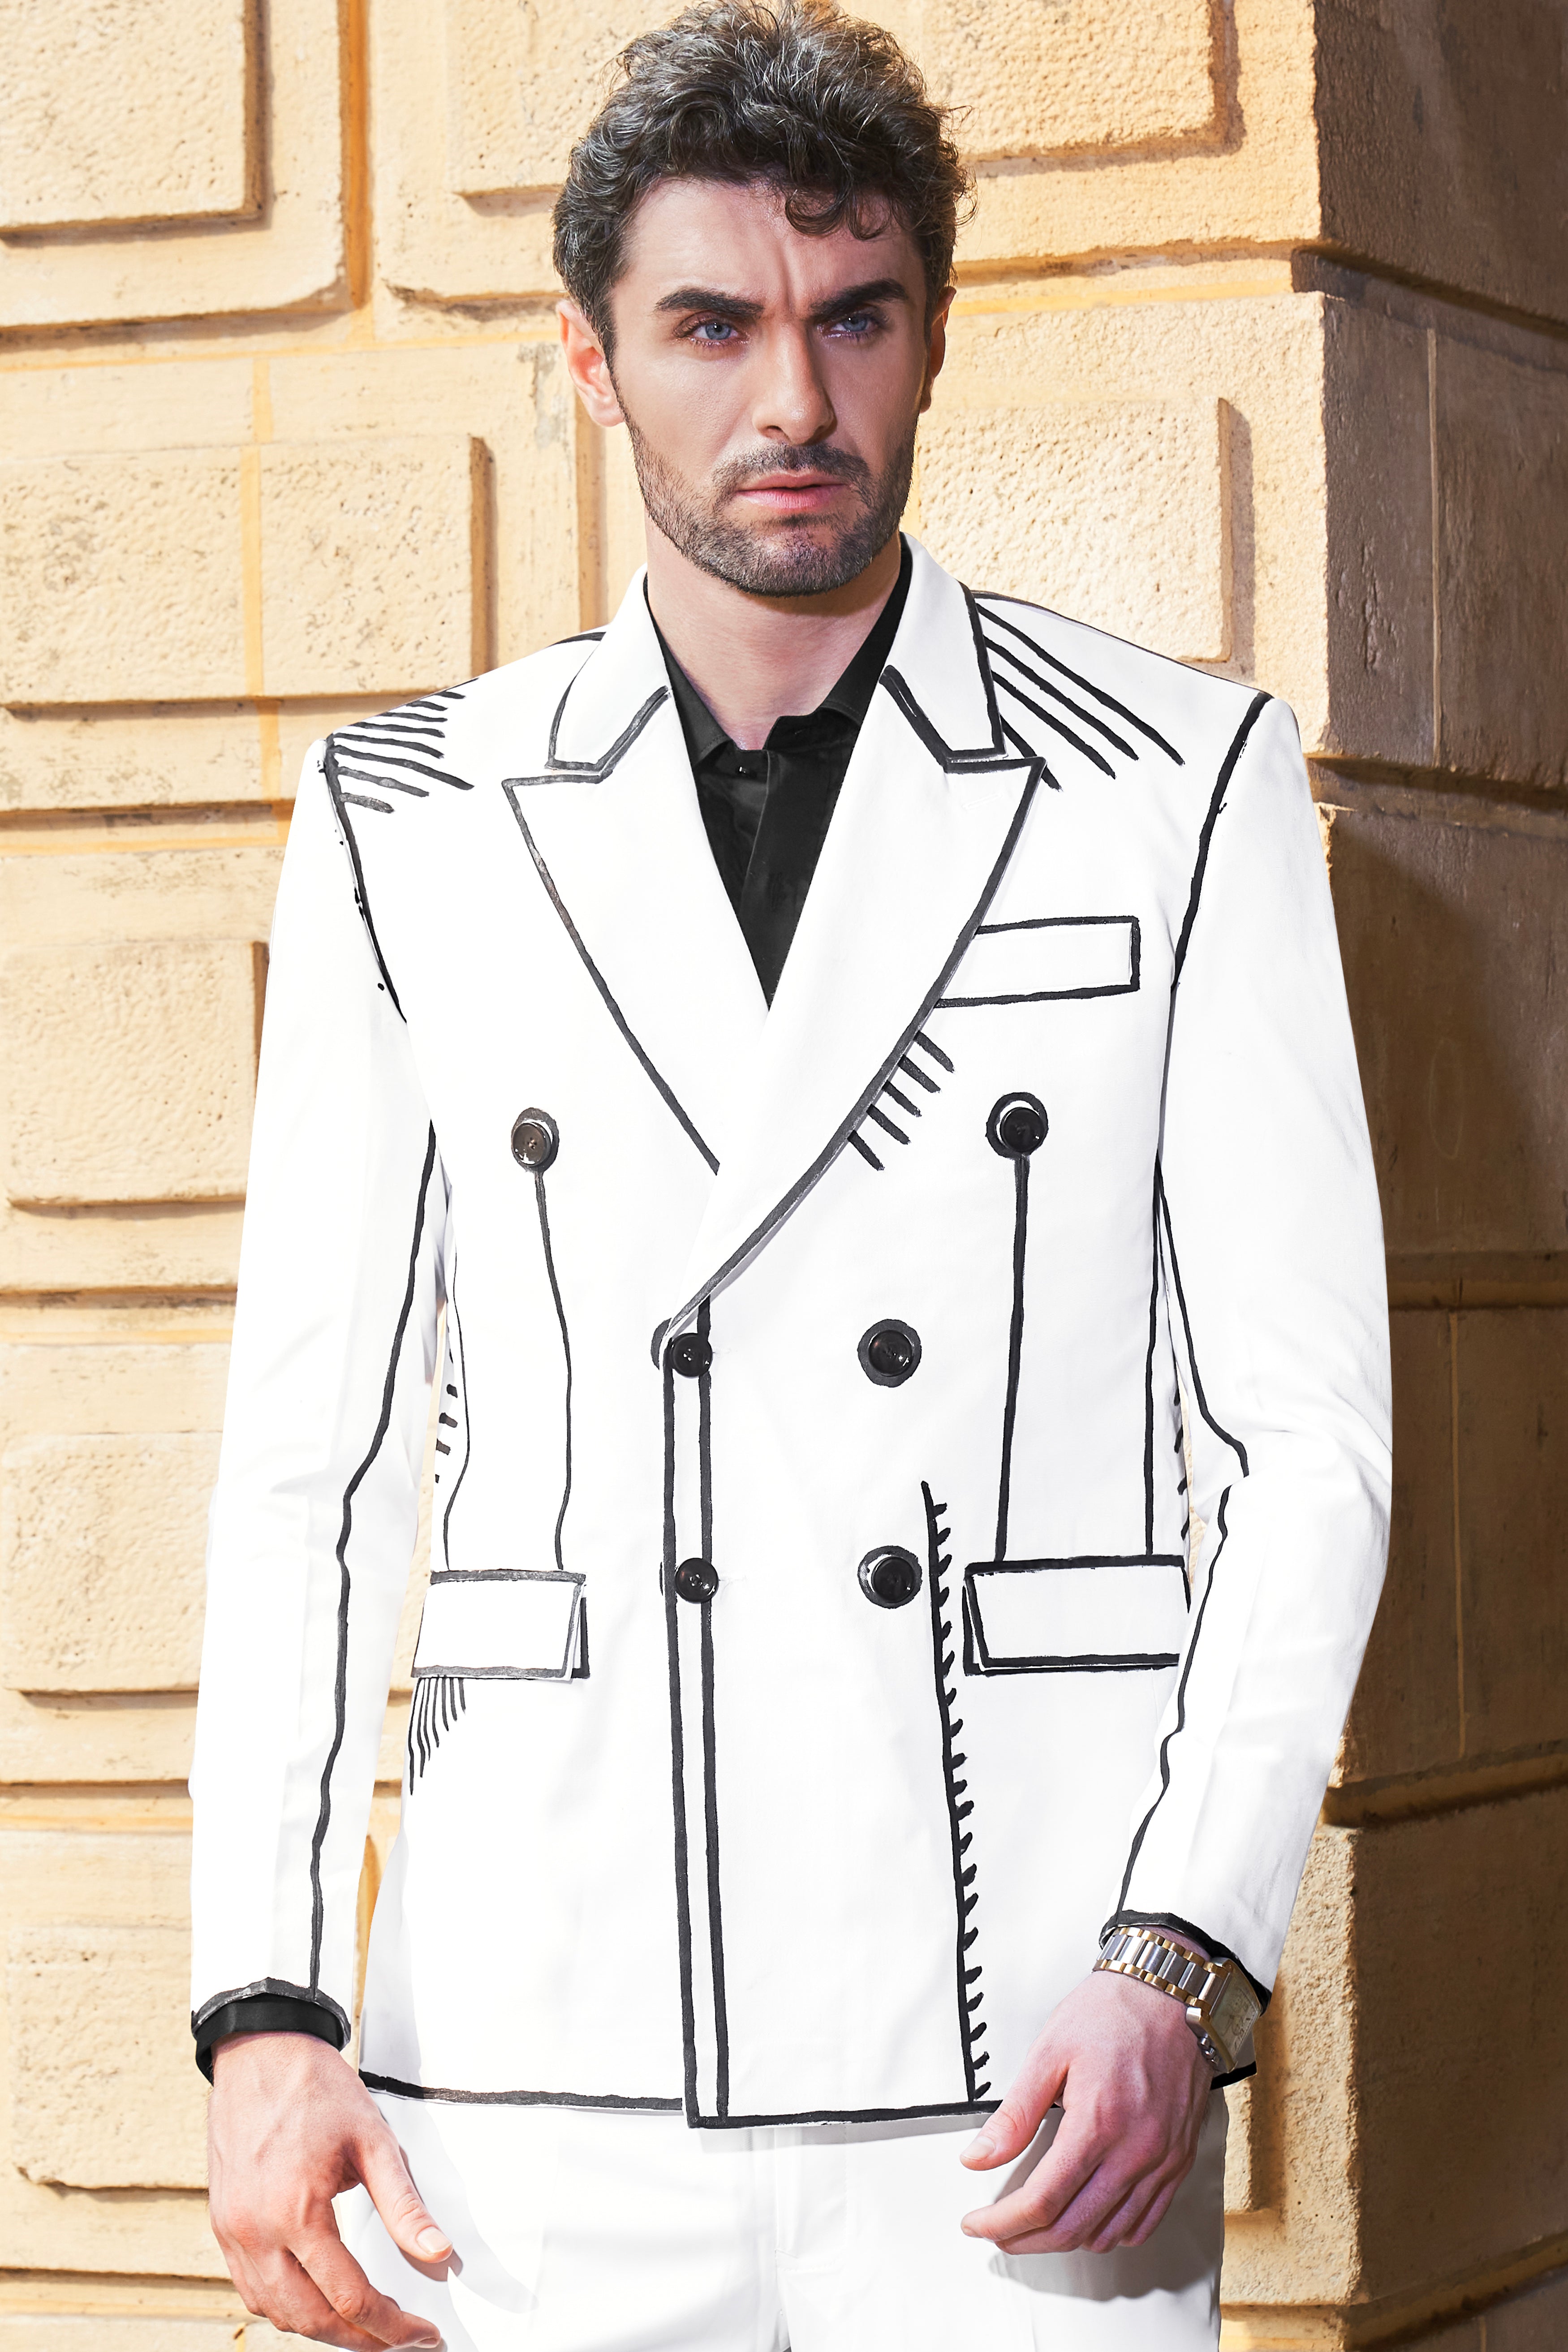 Bright White with Black Hand Painted Wool Rich Designer Blazer BL3010-DB-ART-36, BL3010-DB-ART-38, BL3010-DB-ART-40, BL3010-DB-ART-42, BL3010-DB-ART-44, BL3010-DB-ART-46, BL3010-DB-ART-48, BL3010-DB-ART-50, BL3010-DB-ART-52, BL3010-DB-ART-54, BL3010-DB-ART-56, BL3010-DB-ART-58, BL3010-DB-ART-60